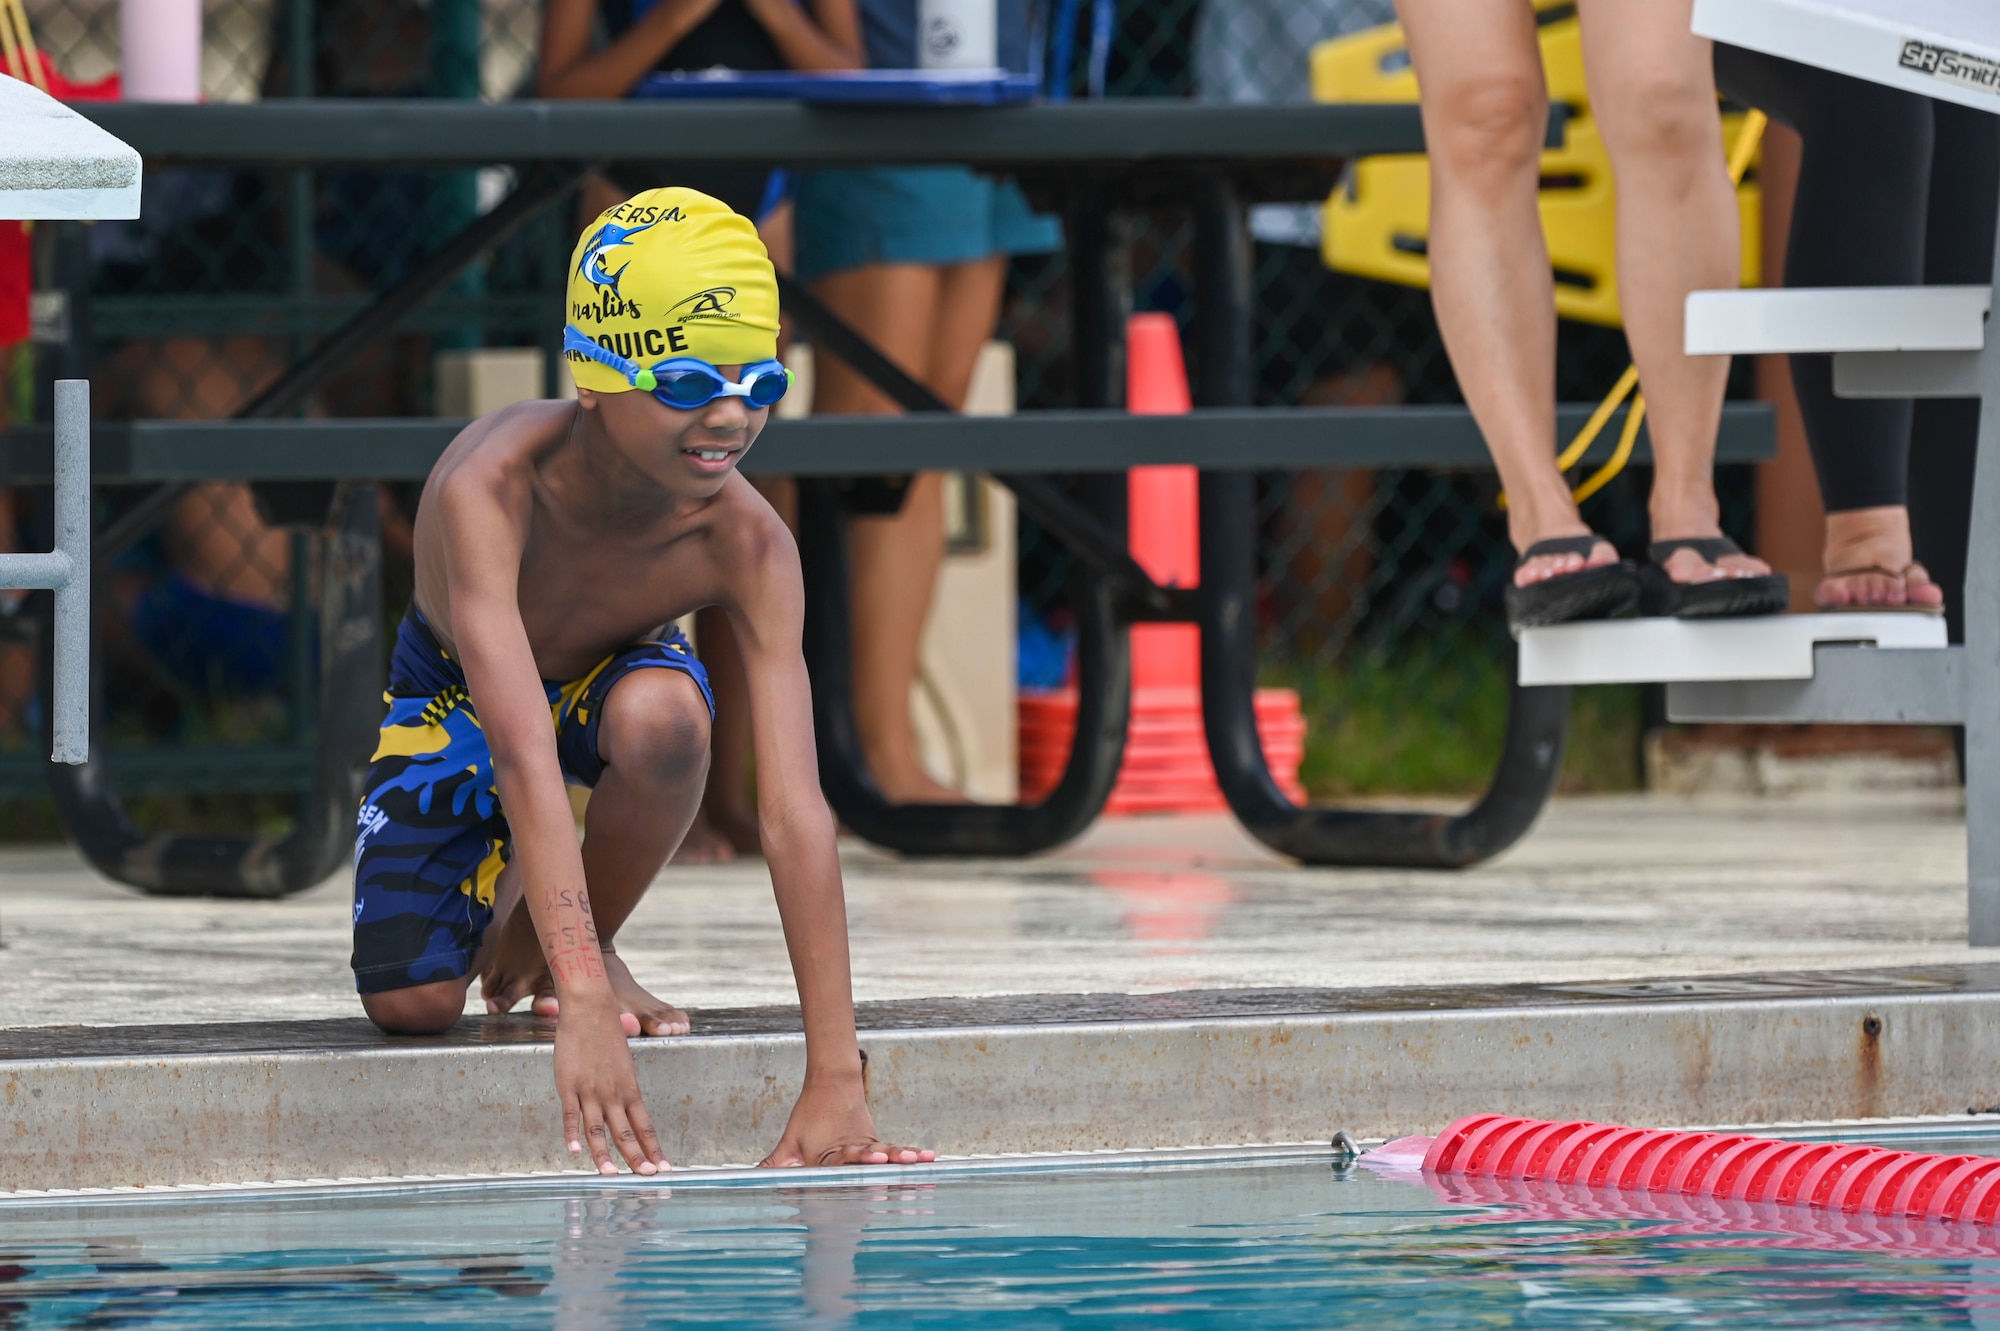 A swimmer prepares to dive into a pool